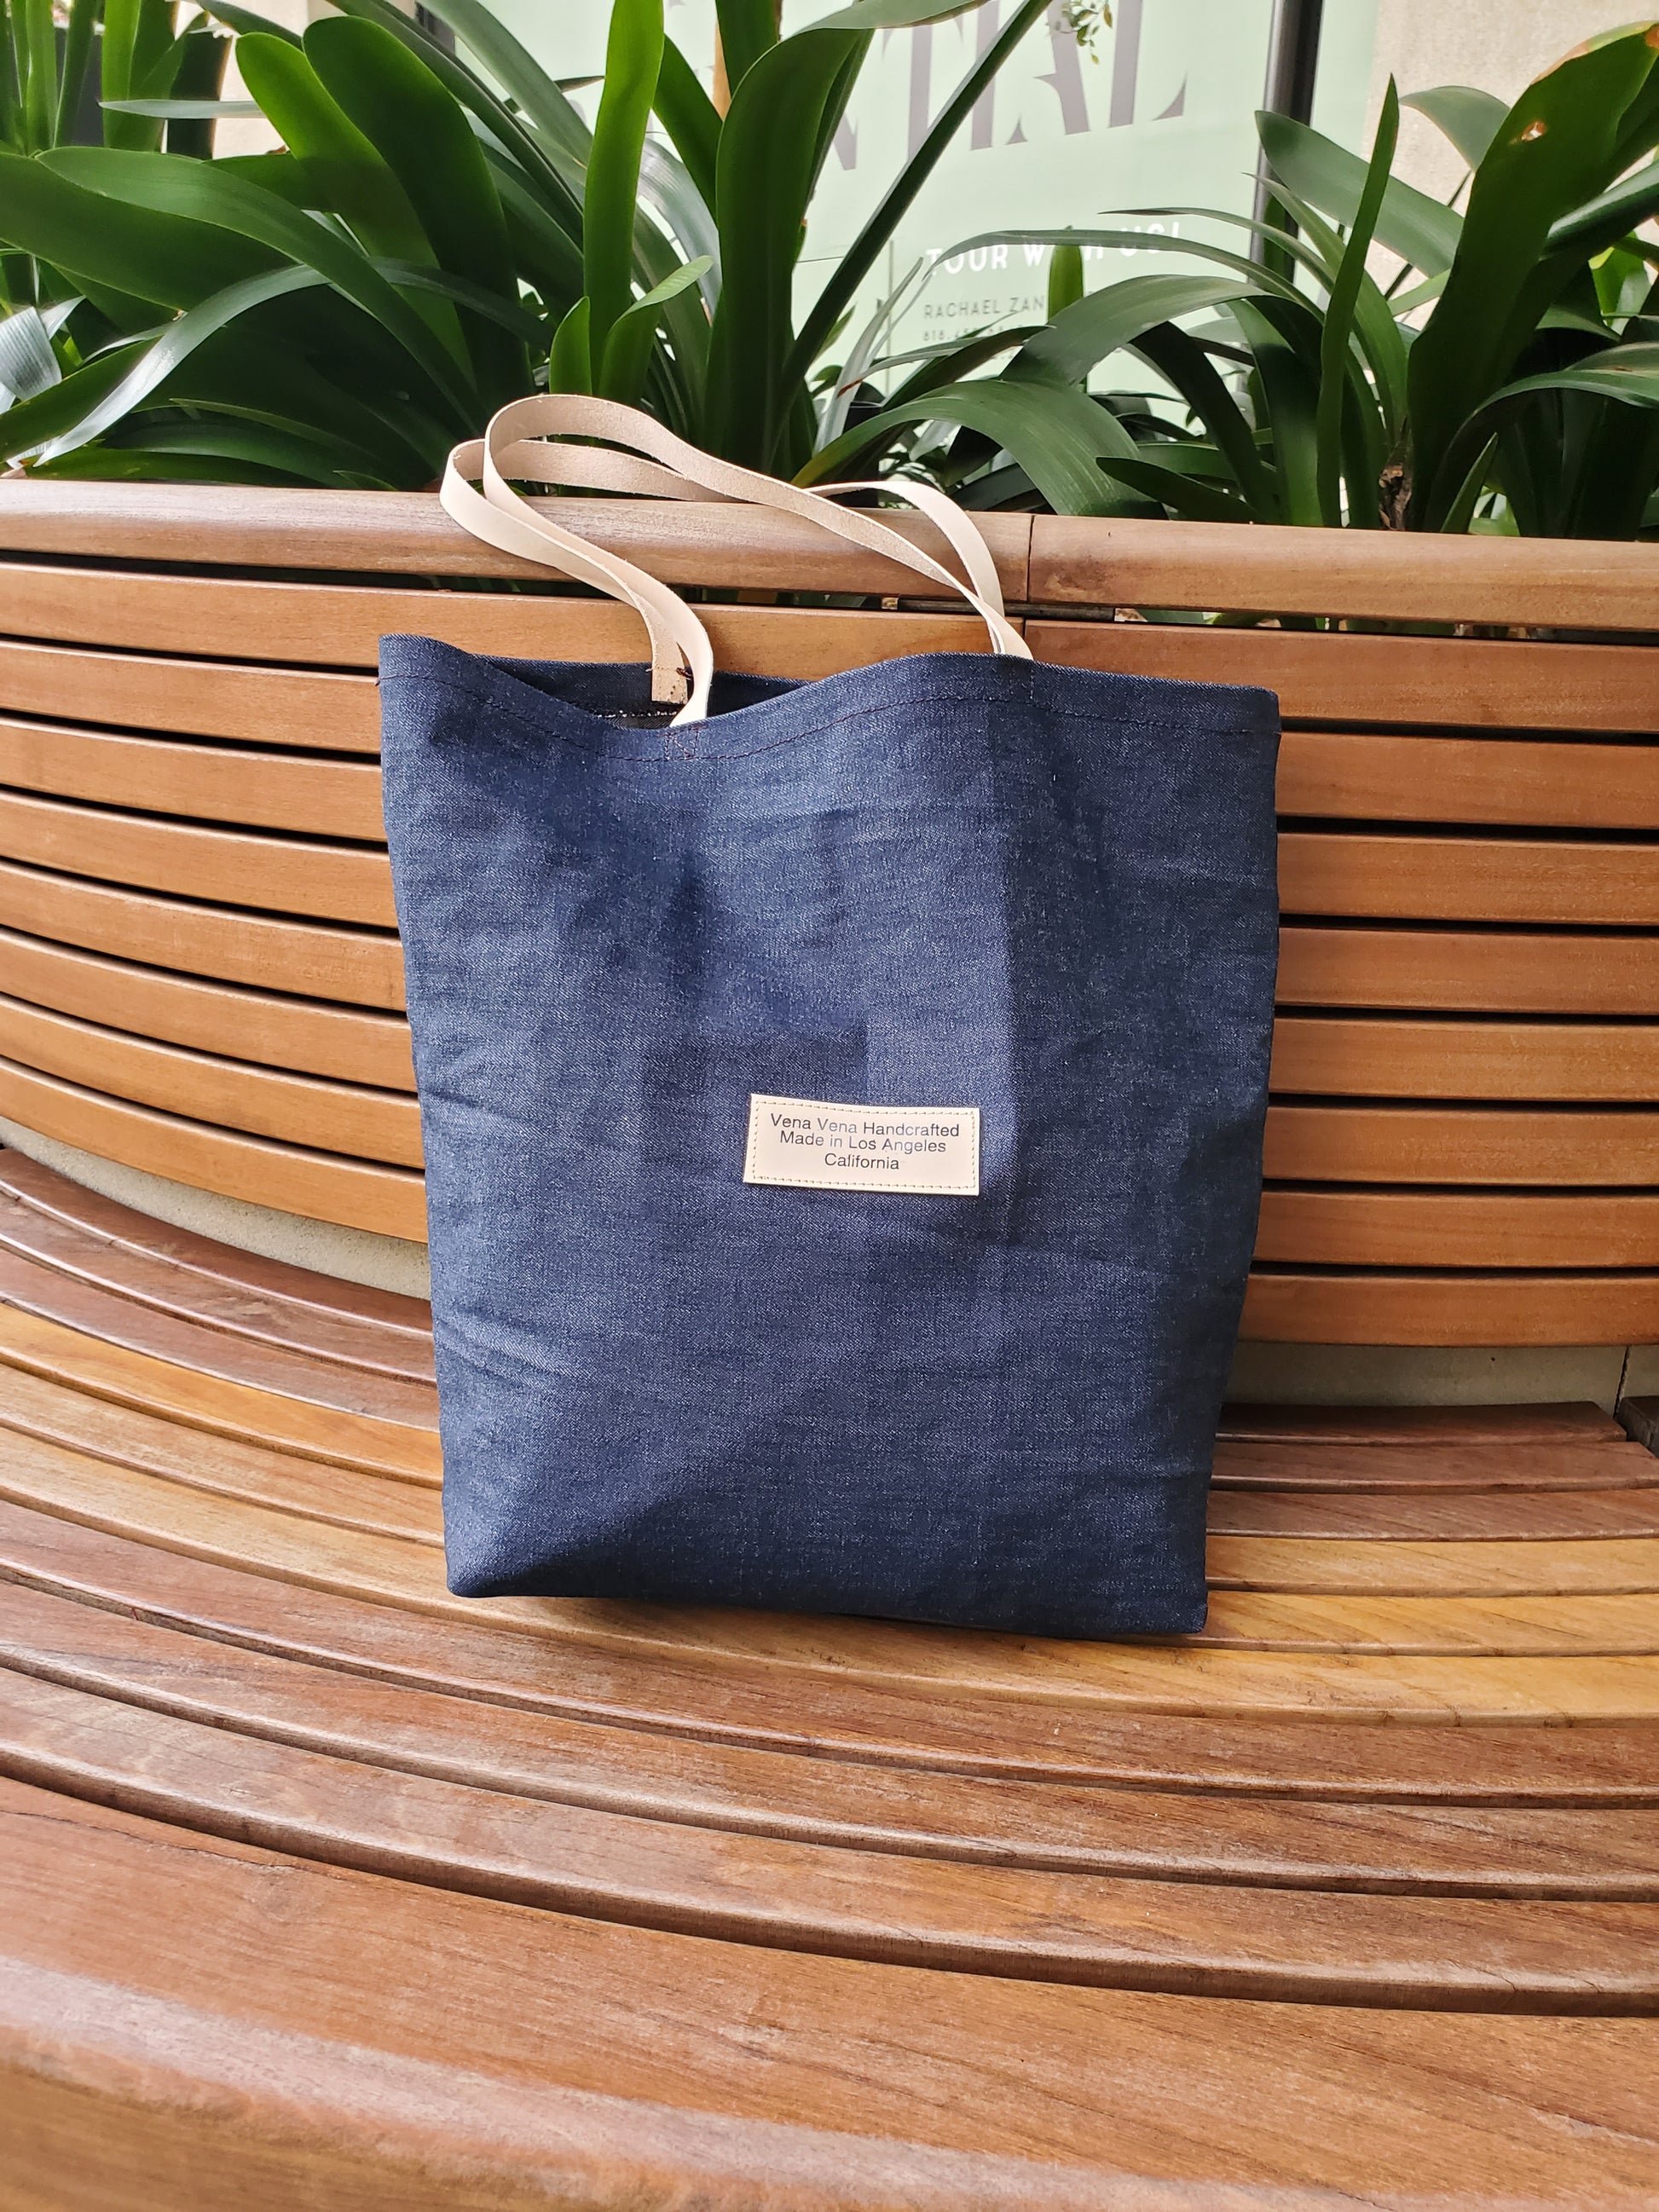 Denim tote bag with natrural color leather straps. Made in Los Angeles